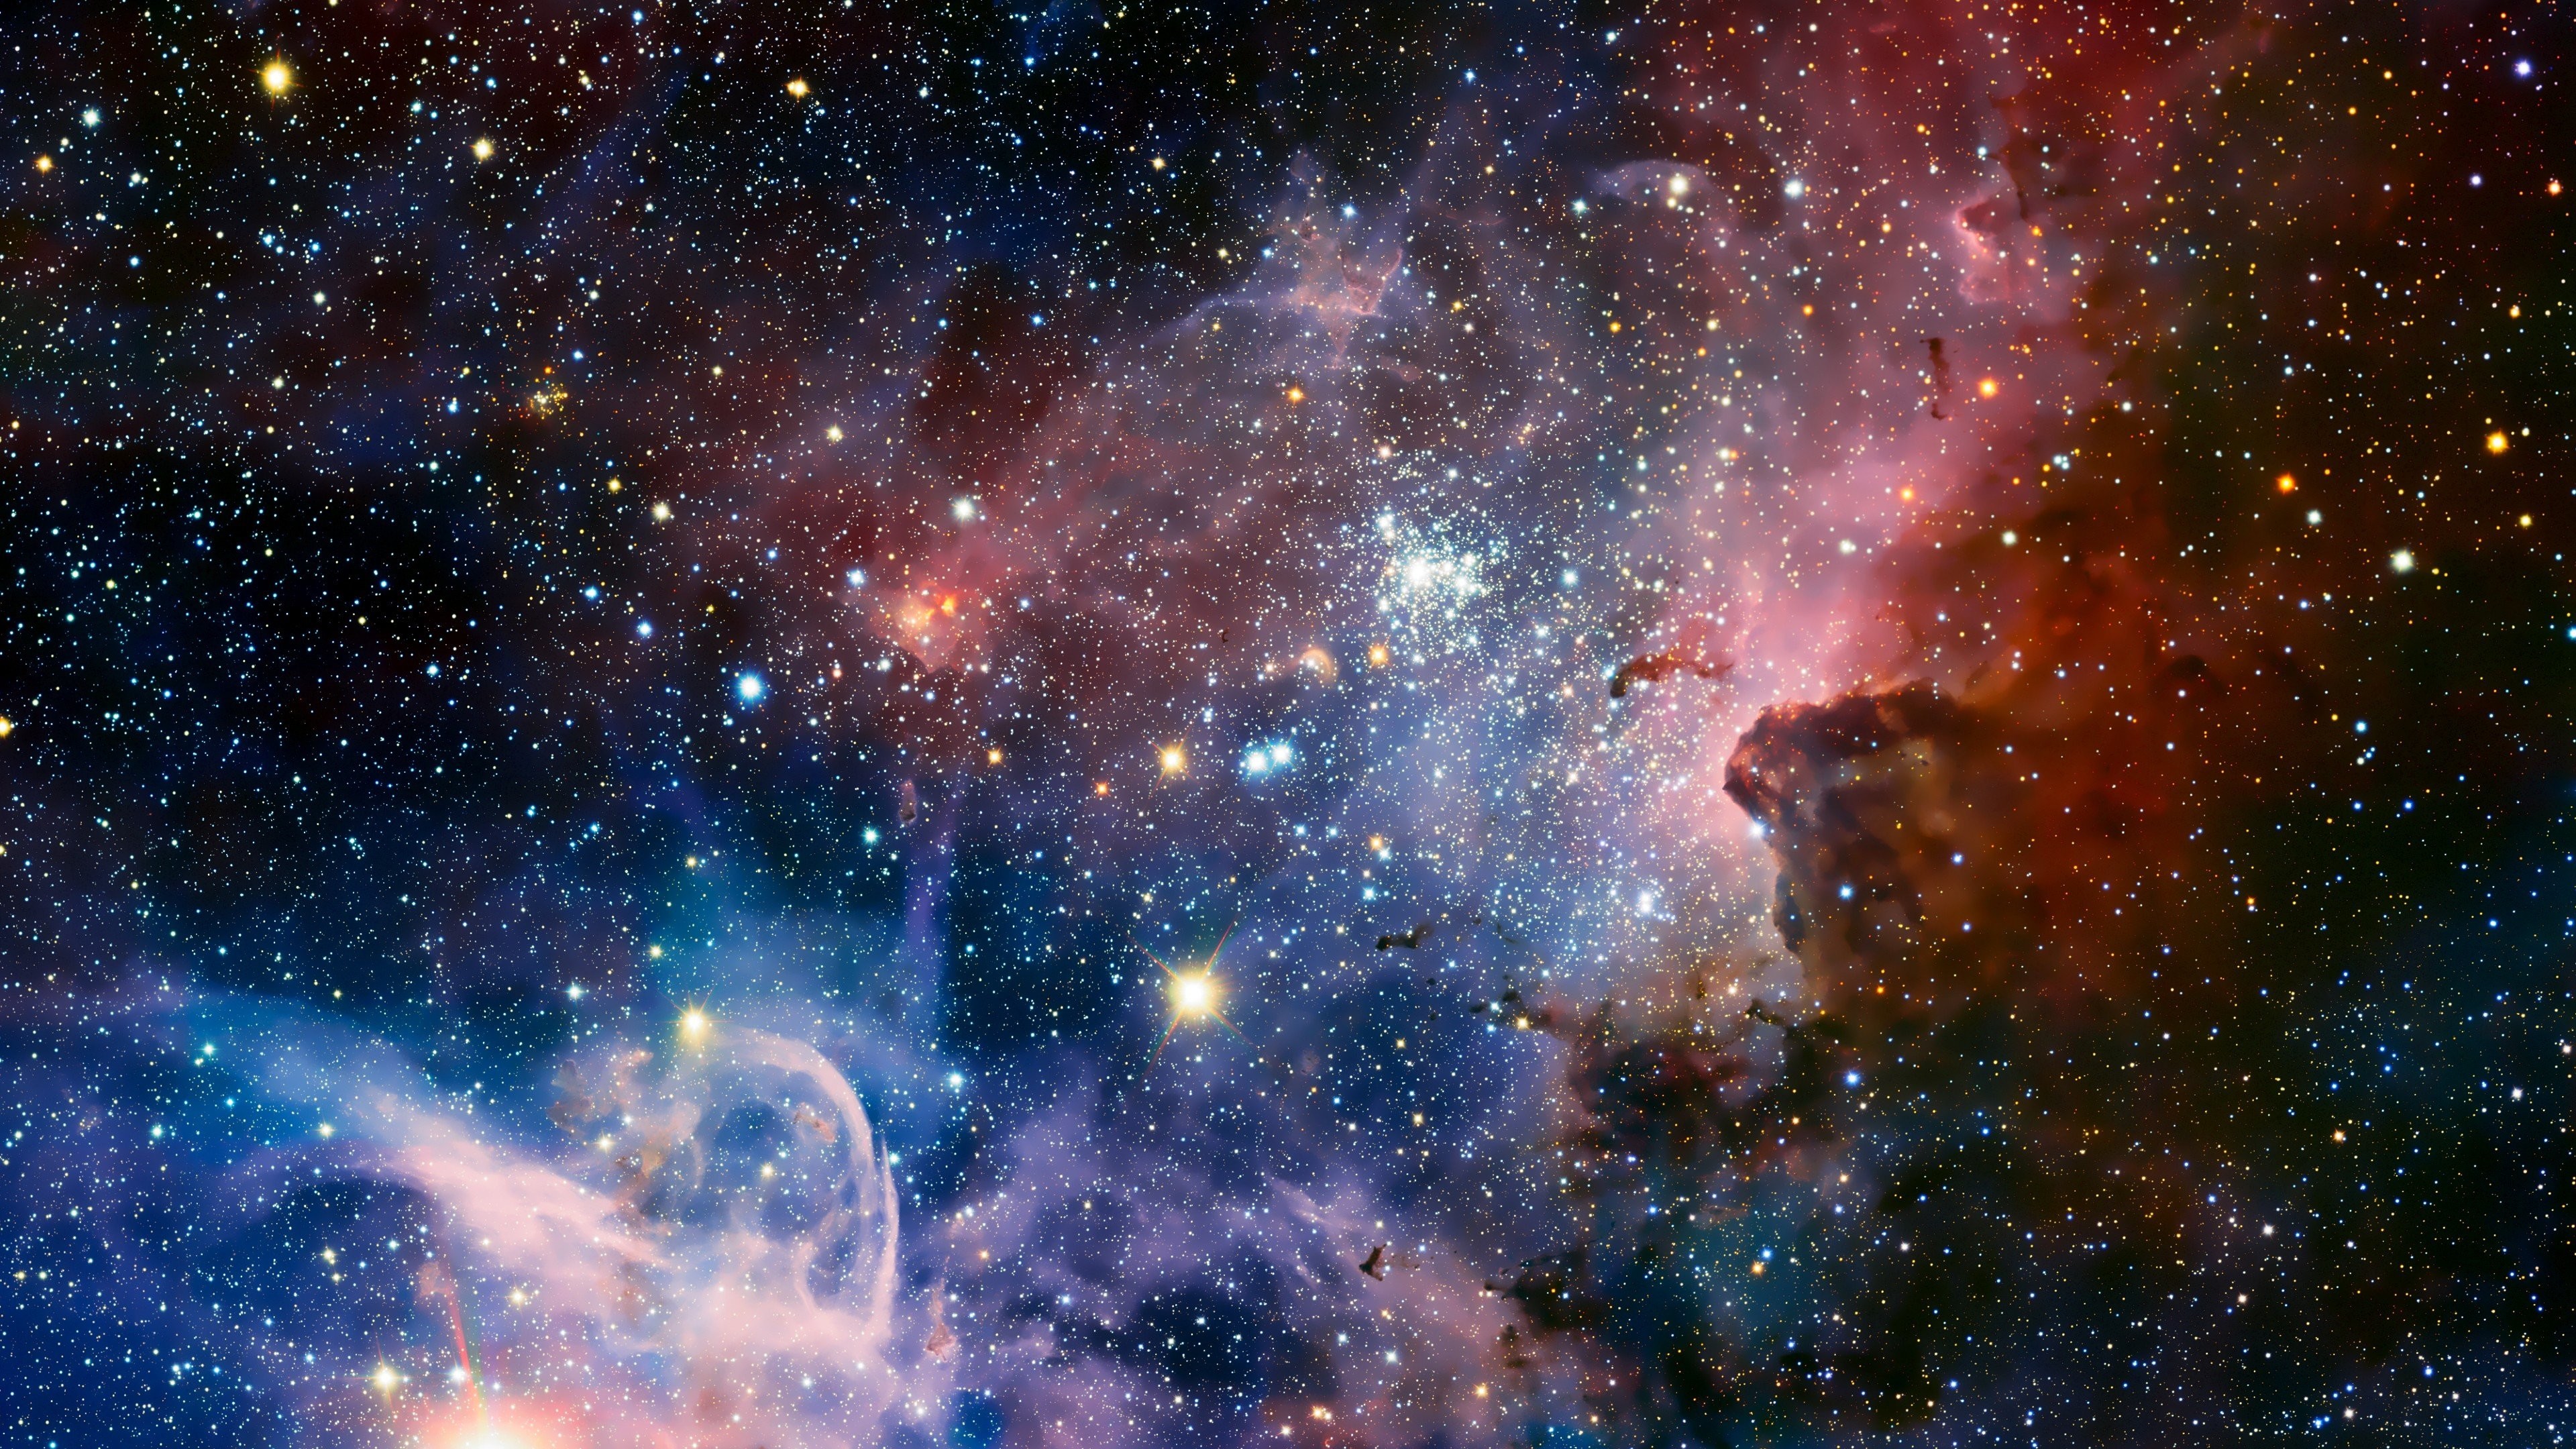 3840x2160 2560x1440 Download 3k Beautiful Space Image - Universe & Space Wallpapers HD